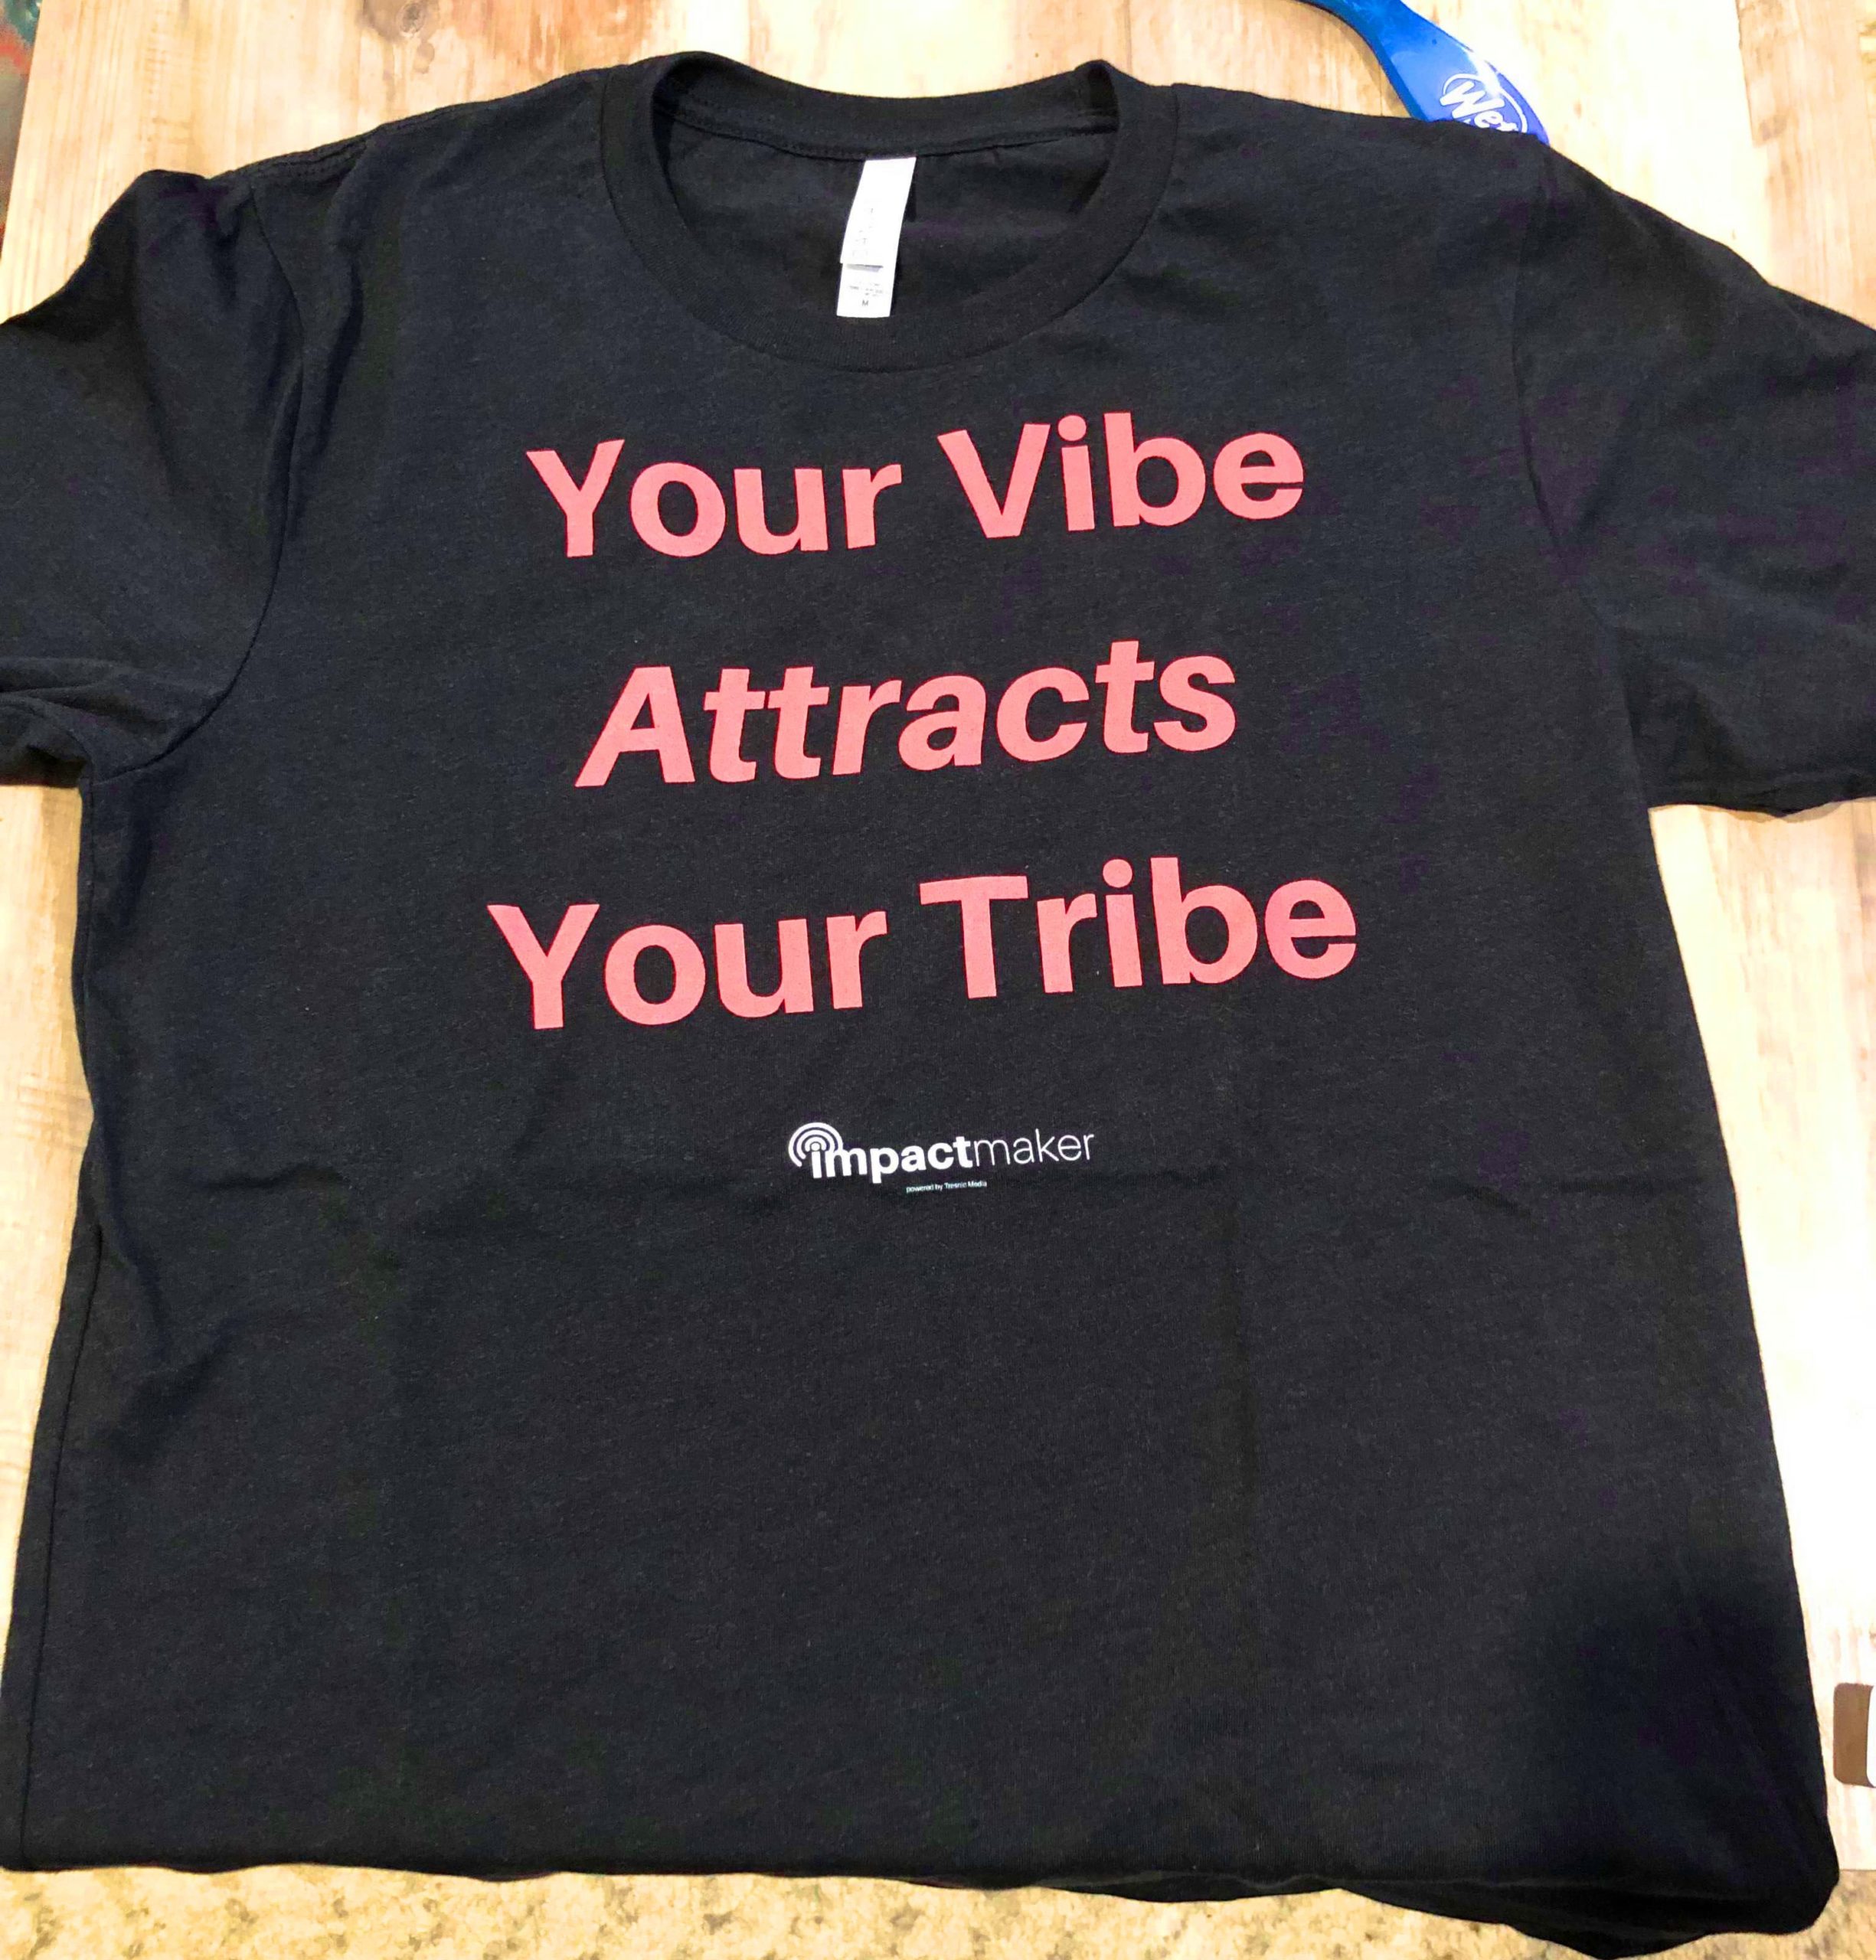 your-vibe-attracts-your-tribe-tshirt-on-table-min